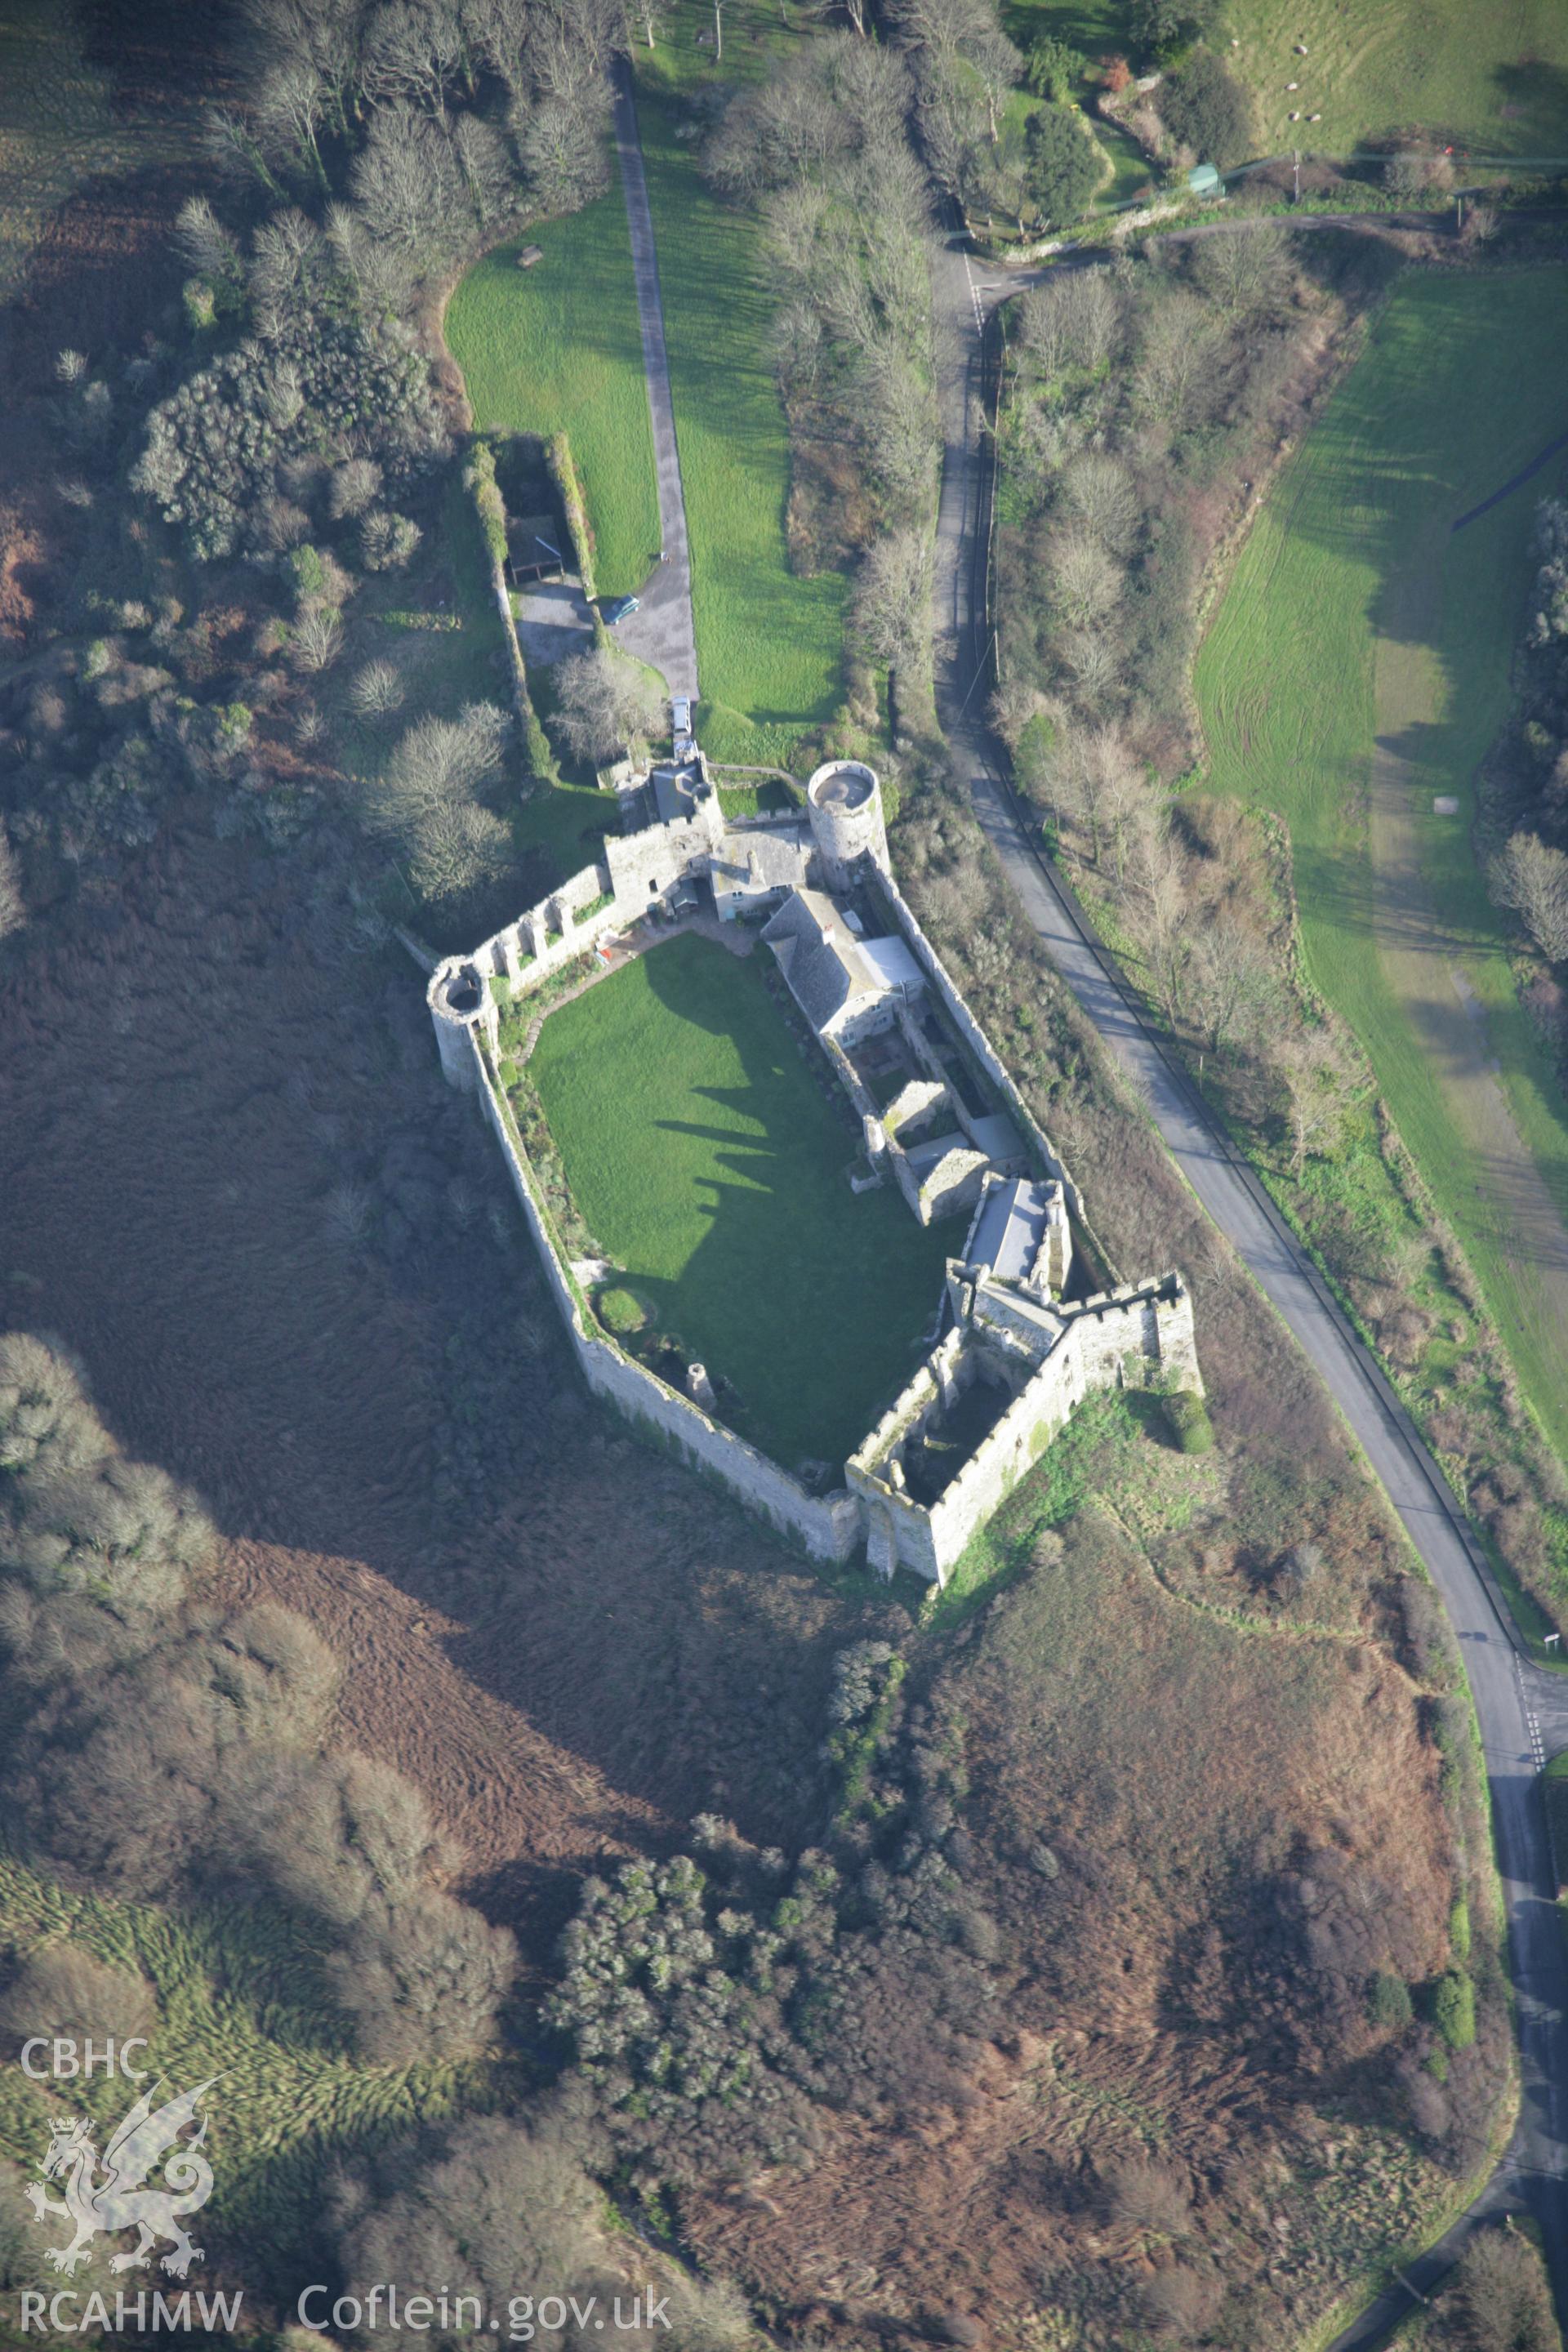 RCAHMW colour oblique aerial photograph of Manorbier Castle. Taken on 11 January 2006 by Toby Driver.